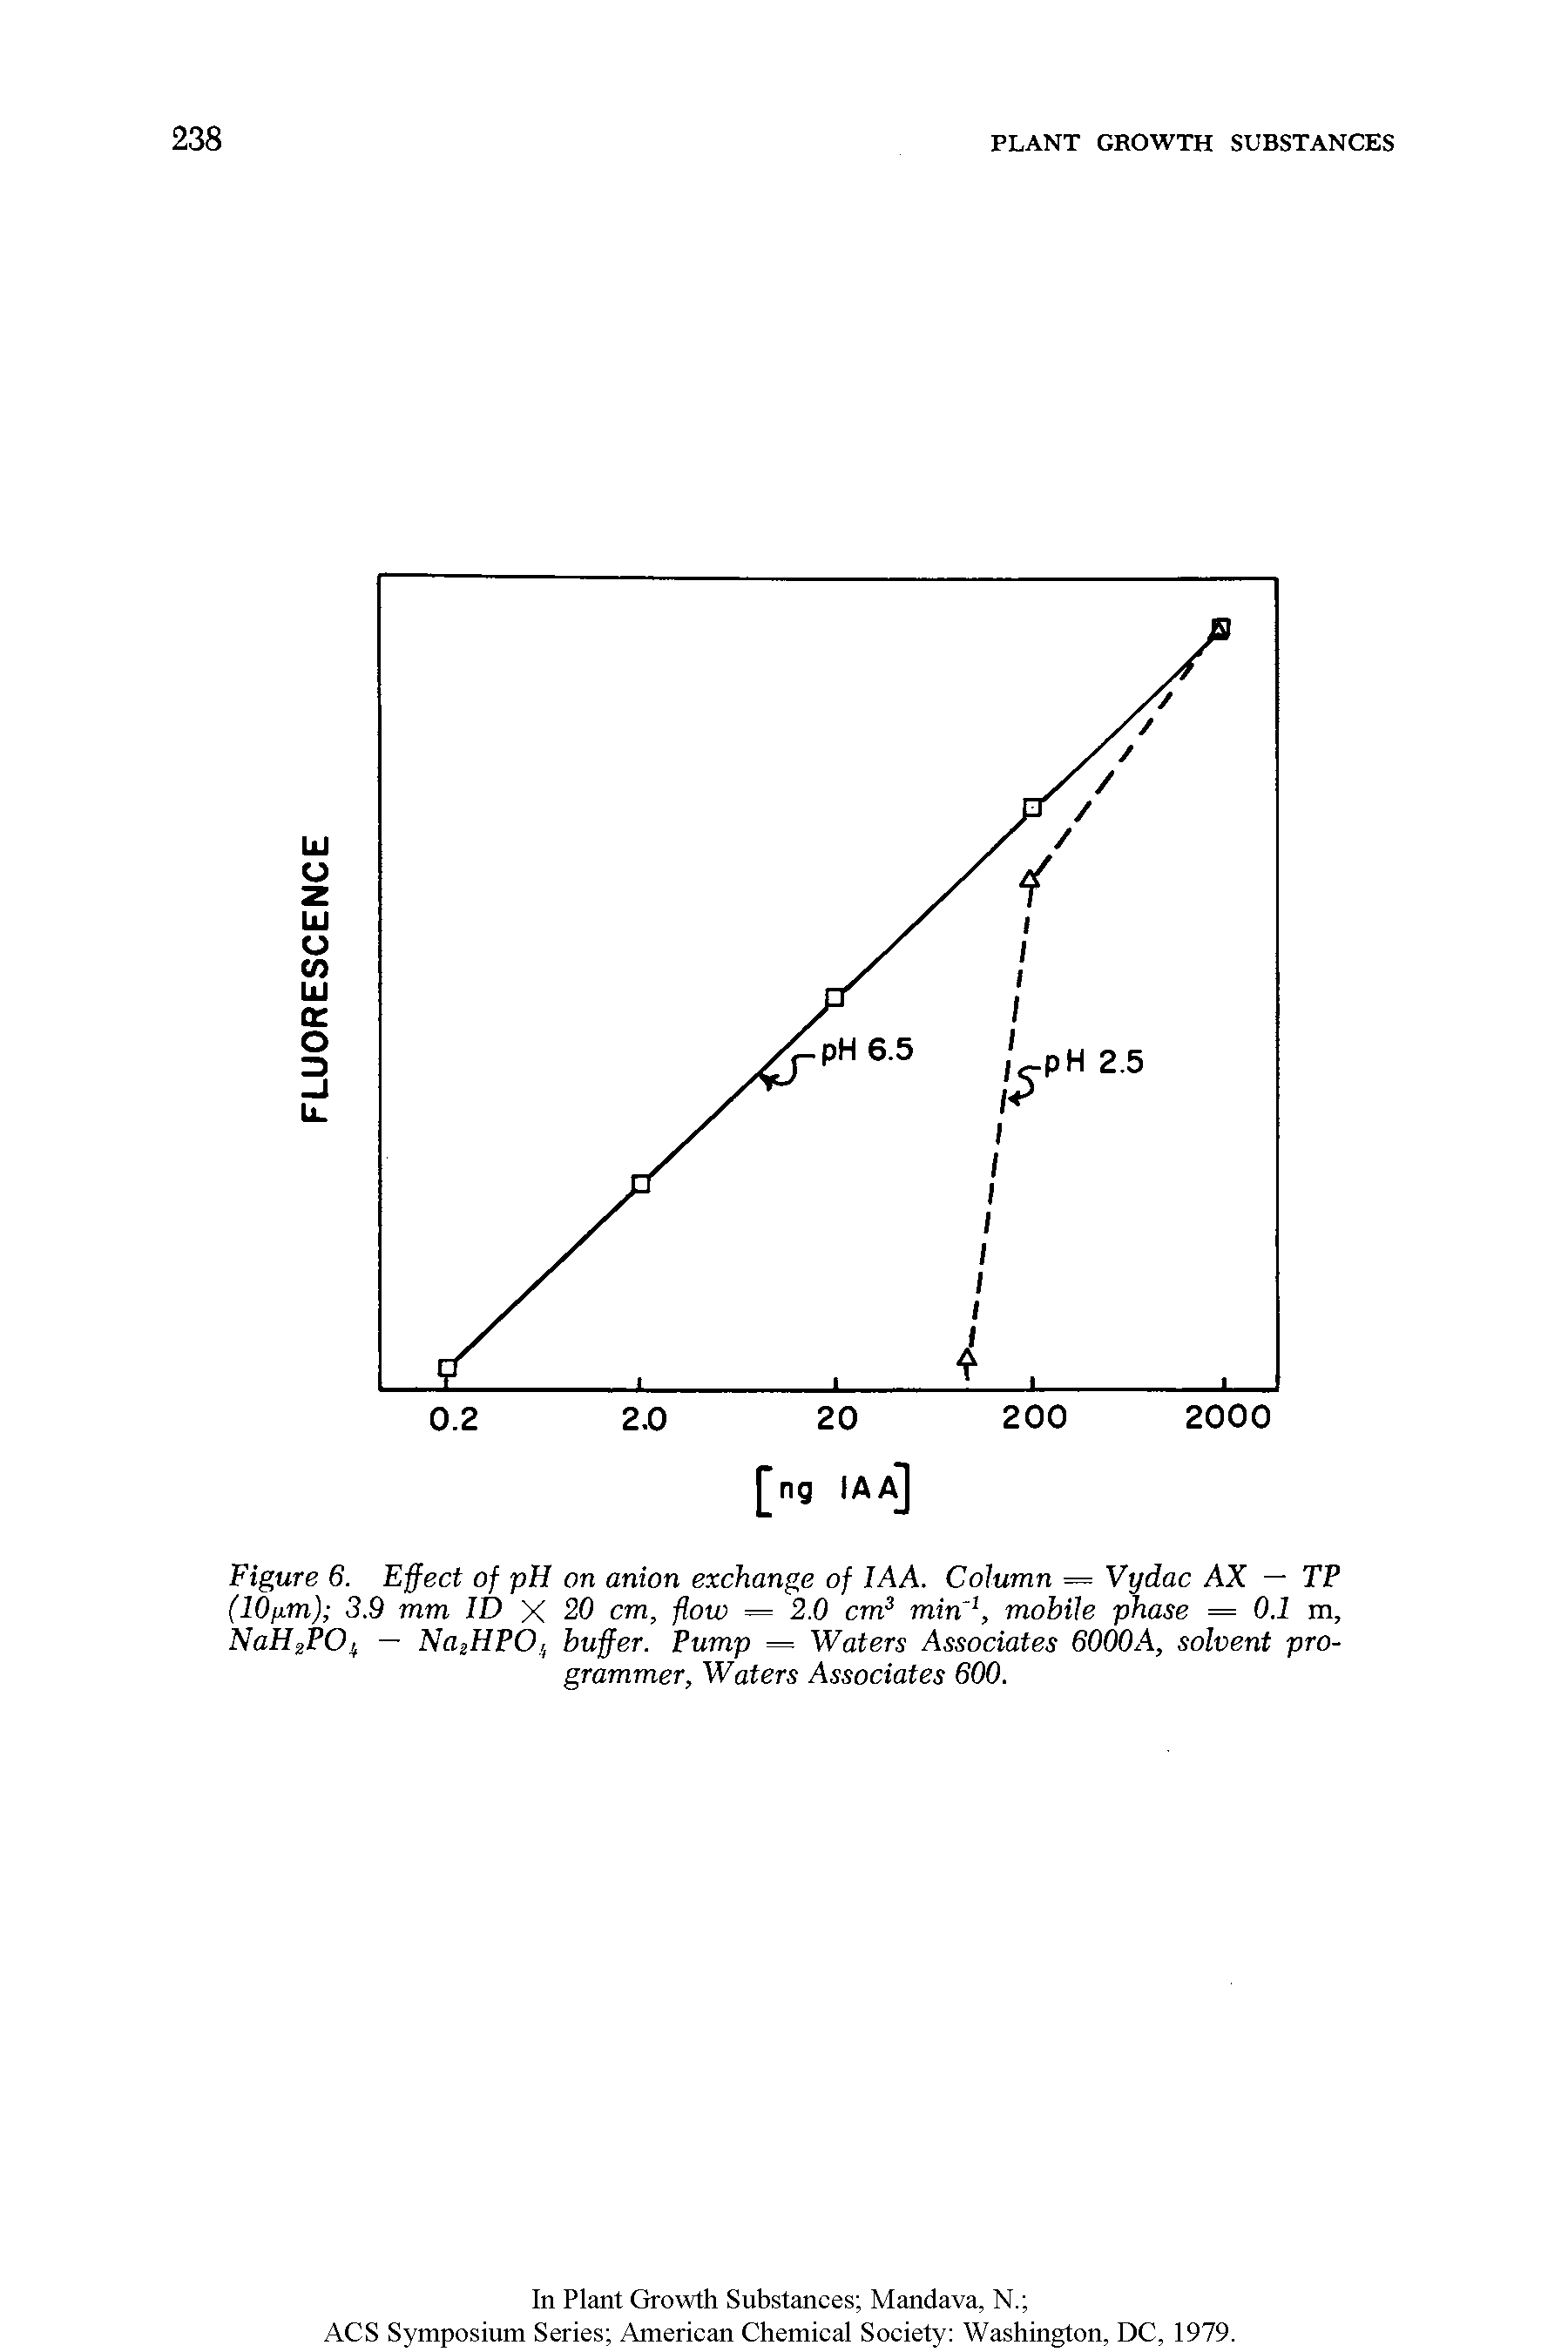 Figure 6. Effect of pH on anion exchange of IAA, Column — Vydac AX — TP (10p.m) 3.9 mm ID X 20 cm, flow = 2.0 cm3 min1, mobile phase = 0.1 m, Naff2P04 — Na HPO( buffer. Pump = Waters Associates 6000A, solvent programmer, Waters Associates 600.